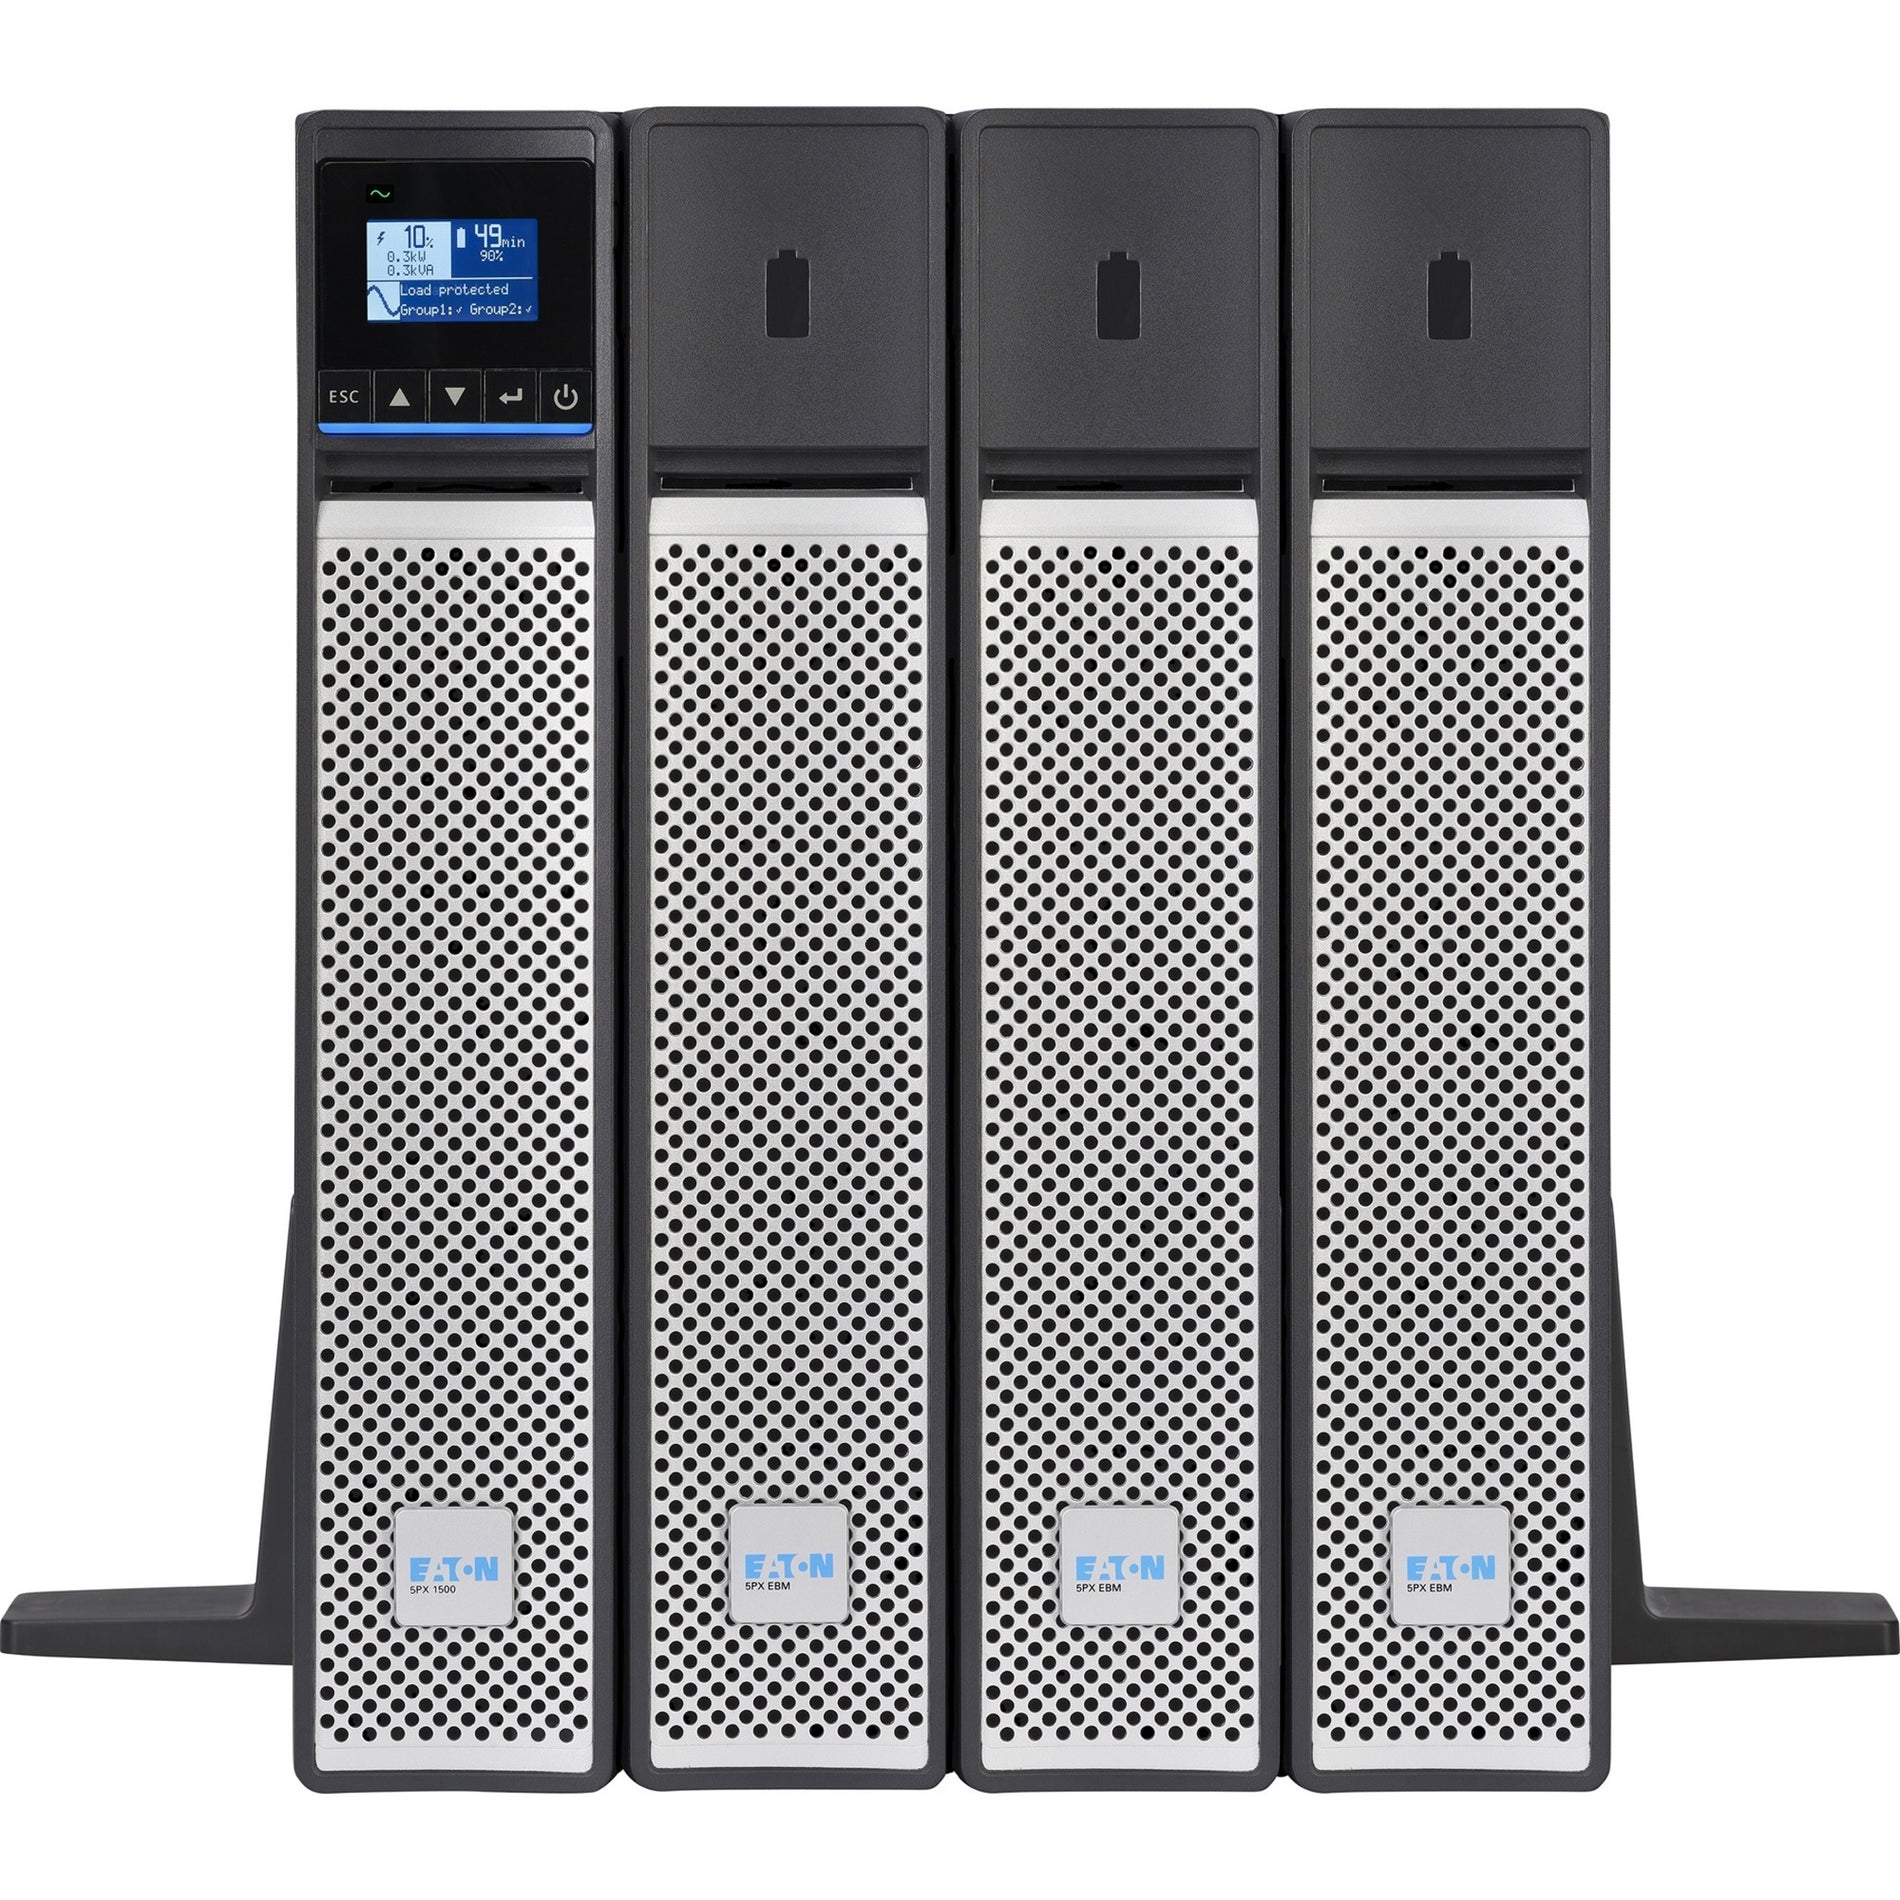 Eaton 5PX3000RTNG2 5PX G2 UPS, 3000VA 3000W 120V Line-Interactive UPS, Cybersecure Network Card Included, Extended Run, 2U Rack/Tower